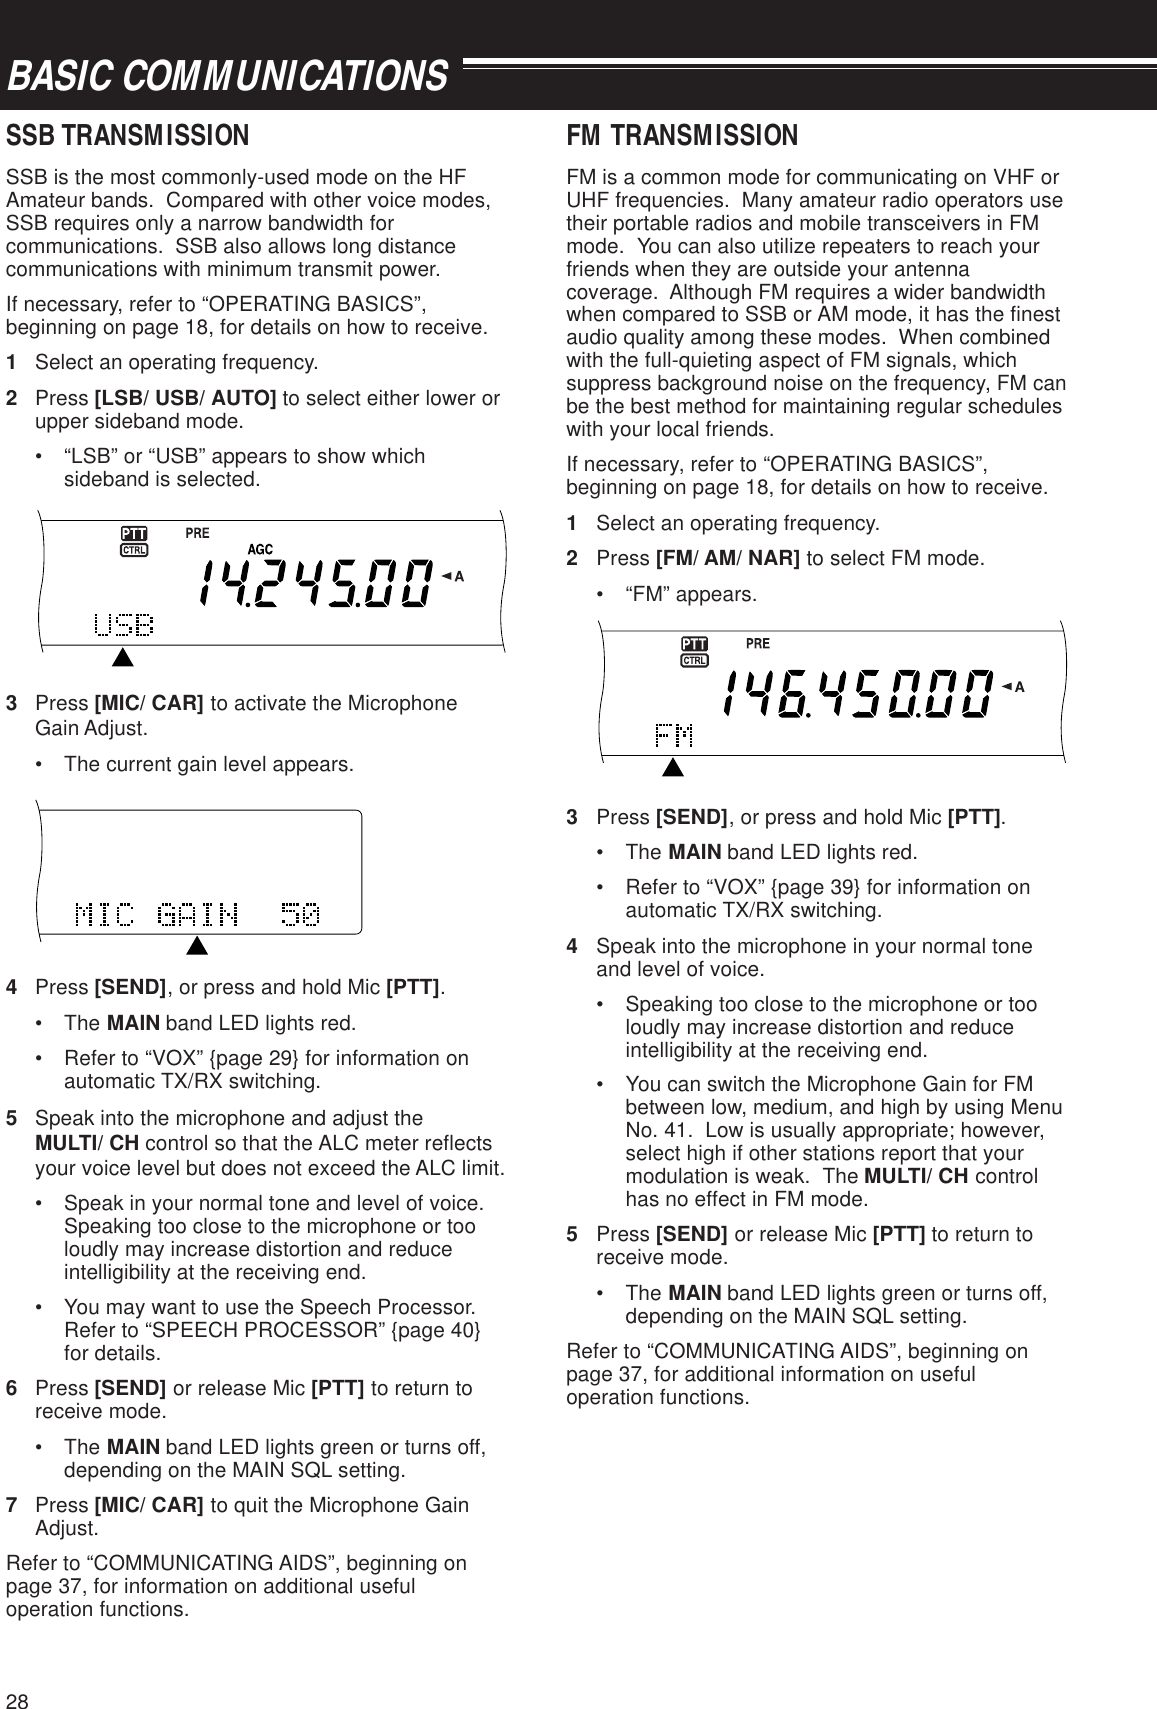 28BASIC COMMUNICATIONSSSB TRANSMISSIONSSB is the most commonly-used mode on the HFAmateur bands.  Compared with other voice modes,SSB requires only a narrow bandwidth forcommunications.  SSB also allows long distancecommunications with minimum transmit power.If necessary, refer to “OPERATING BASICS”,beginning on page 18, for details on how to receive.1Select an operating frequency.2Press [LSB/ USB/ AUTO] to select either lower orupper sideband mode.• “LSB” or “USB” appears to show whichsideband is selected.3Press [MIC/ CAR] to activate the MicrophoneGain Adjust.• The current gain level appears.4Press [SEND], or press and hold Mic [PTT].• The MAIN band LED lights red.• Refer to “VOX” {page 29} for information onautomatic TX/RX switching.5Speak into the microphone and adjust theMULTI/ CH control so that the ALC meter reflectsyour voice level but does not exceed the ALC limit.• Speak in your normal tone and level of voice.Speaking too close to the microphone or tooloudly may increase distortion and reduceintelligibility at the receiving end.• You may want to use the Speech Processor.Refer to “SPEECH PROCESSOR” {page 40}for details.6Press [SEND] or release Mic [PTT] to return toreceive mode.• The MAIN band LED lights green or turns off,depending on the MAIN SQL setting.7Press [MIC/ CAR] to quit the Microphone GainAdjust.Refer to “COMMUNICATING AIDS”, beginning onpage 37, for information on additional usefuloperation functions.FM TRANSMISSIONFM is a common mode for communicating on VHF orUHF frequencies.  Many amateur radio operators usetheir portable radios and mobile transceivers in FMmode.  You can also utilize repeaters to reach yourfriends when they are outside your antennacoverage.  Although FM requires a wider bandwidthwhen compared to SSB or AM mode, it has the finestaudio quality among these modes.  When combinedwith the full-quieting aspect of FM signals, whichsuppress background noise on the frequency, FM canbe the best method for maintaining regular scheduleswith your local friends.If necessary, refer to “OPERATING BASICS”,beginning on page 18, for details on how to receive.1Select an operating frequency.2Press [FM/ AM/ NAR] to select FM mode.• “FM” appears.3Press [SEND], or press and hold Mic [PTT].• The MAIN band LED lights red.• Refer to “VOX” {page 39} for information onautomatic TX/RX switching.4Speak into the microphone in your normal toneand level of voice.• Speaking too close to the microphone or tooloudly may increase distortion and reduceintelligibility at the receiving end.• You can switch the Microphone Gain for FMbetween low, medium, and high by using MenuNo. 41.  Low is usually appropriate; however,select high if other stations report that yourmodulation is weak.  The MULTI/ CH controlhas no effect in FM mode.5Press [SEND] or release Mic [PTT] to return toreceive mode.• The MAIN band LED lights green or turns off,depending on the MAIN SQL setting.Refer to “COMMUNICATING AIDS”, beginning onpage 37, for additional information on usefuloperation functions.